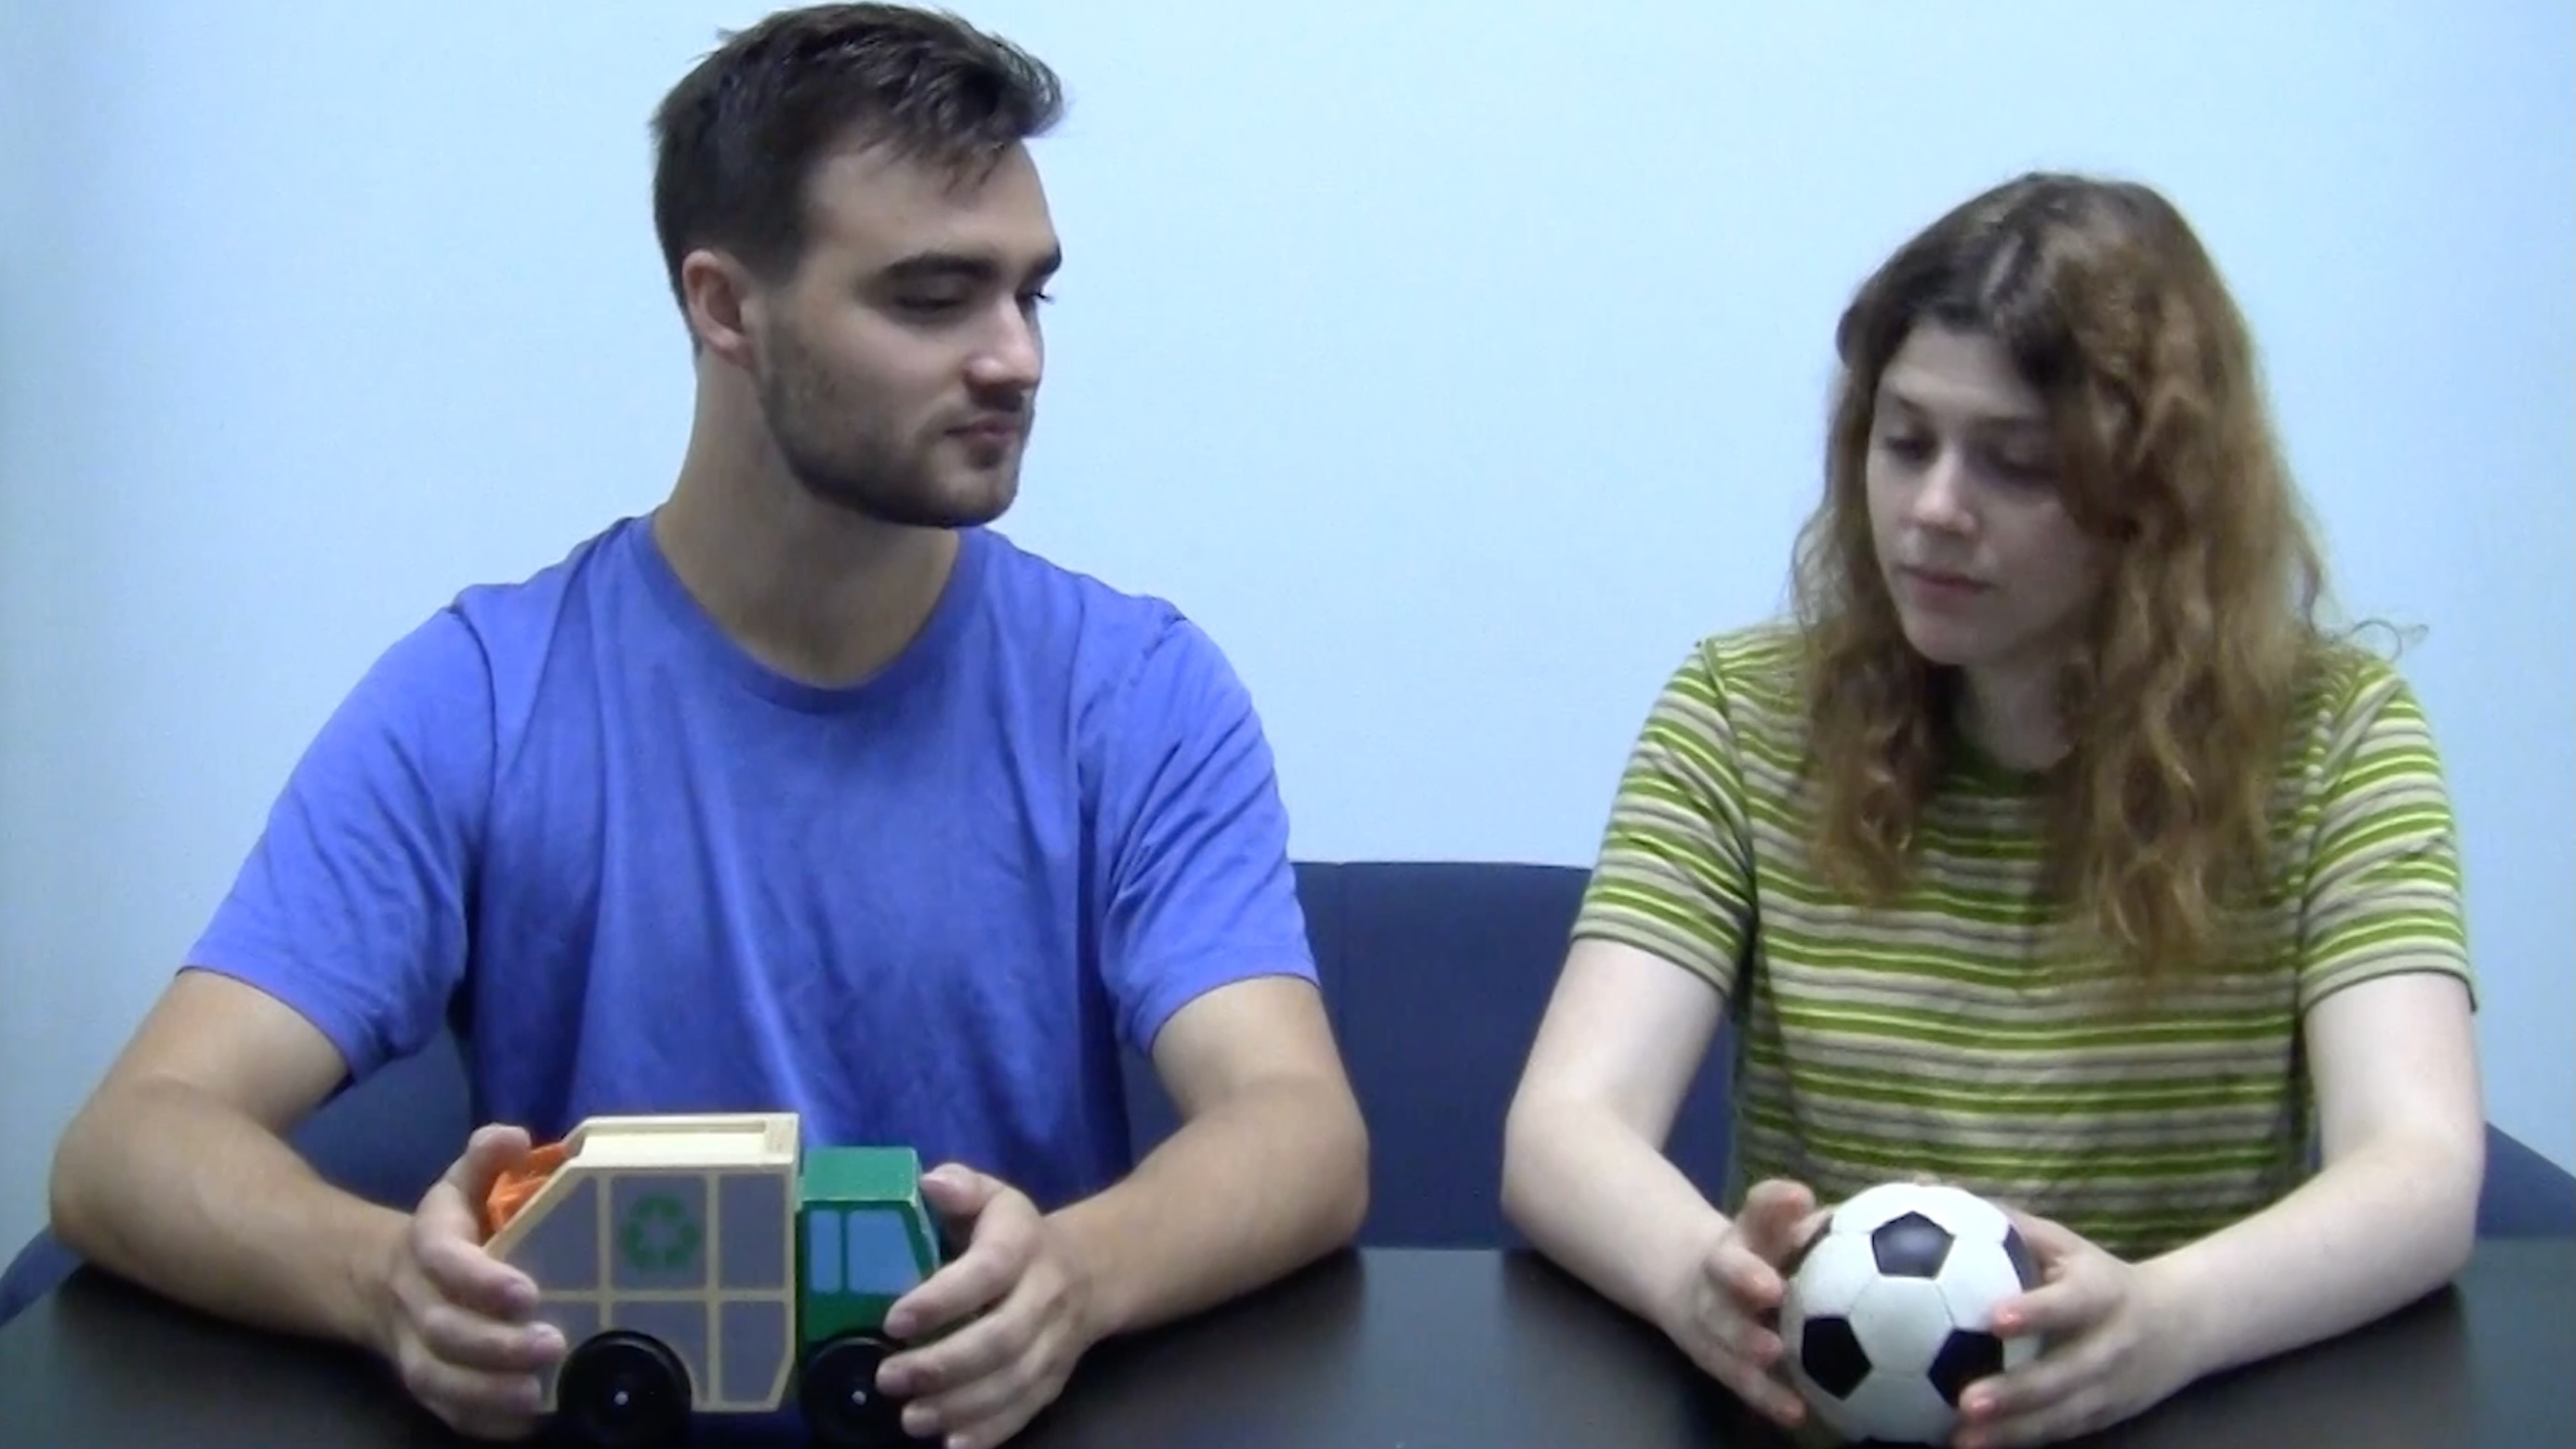 A young man and a young woman sit abreast at a table in an empty room, and calmly exchange a toy garbage truck for a toy soccer ball.